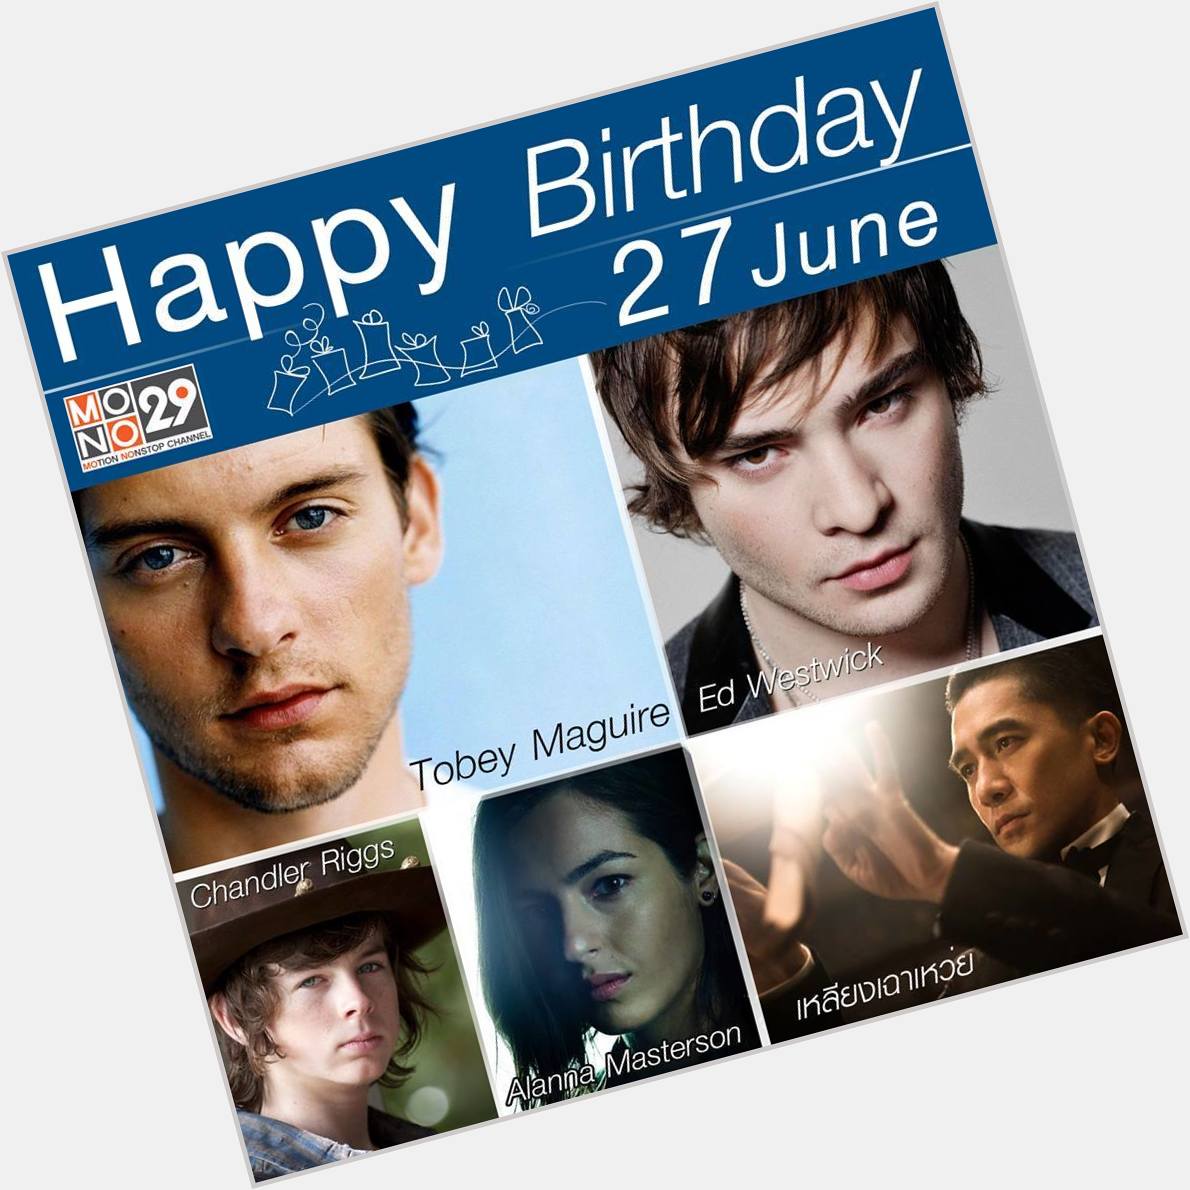 27 June
Happy Birthday to....Tobey Maguire, Ed Westwick,              , Chandler Riggs, Alanna Masterson 